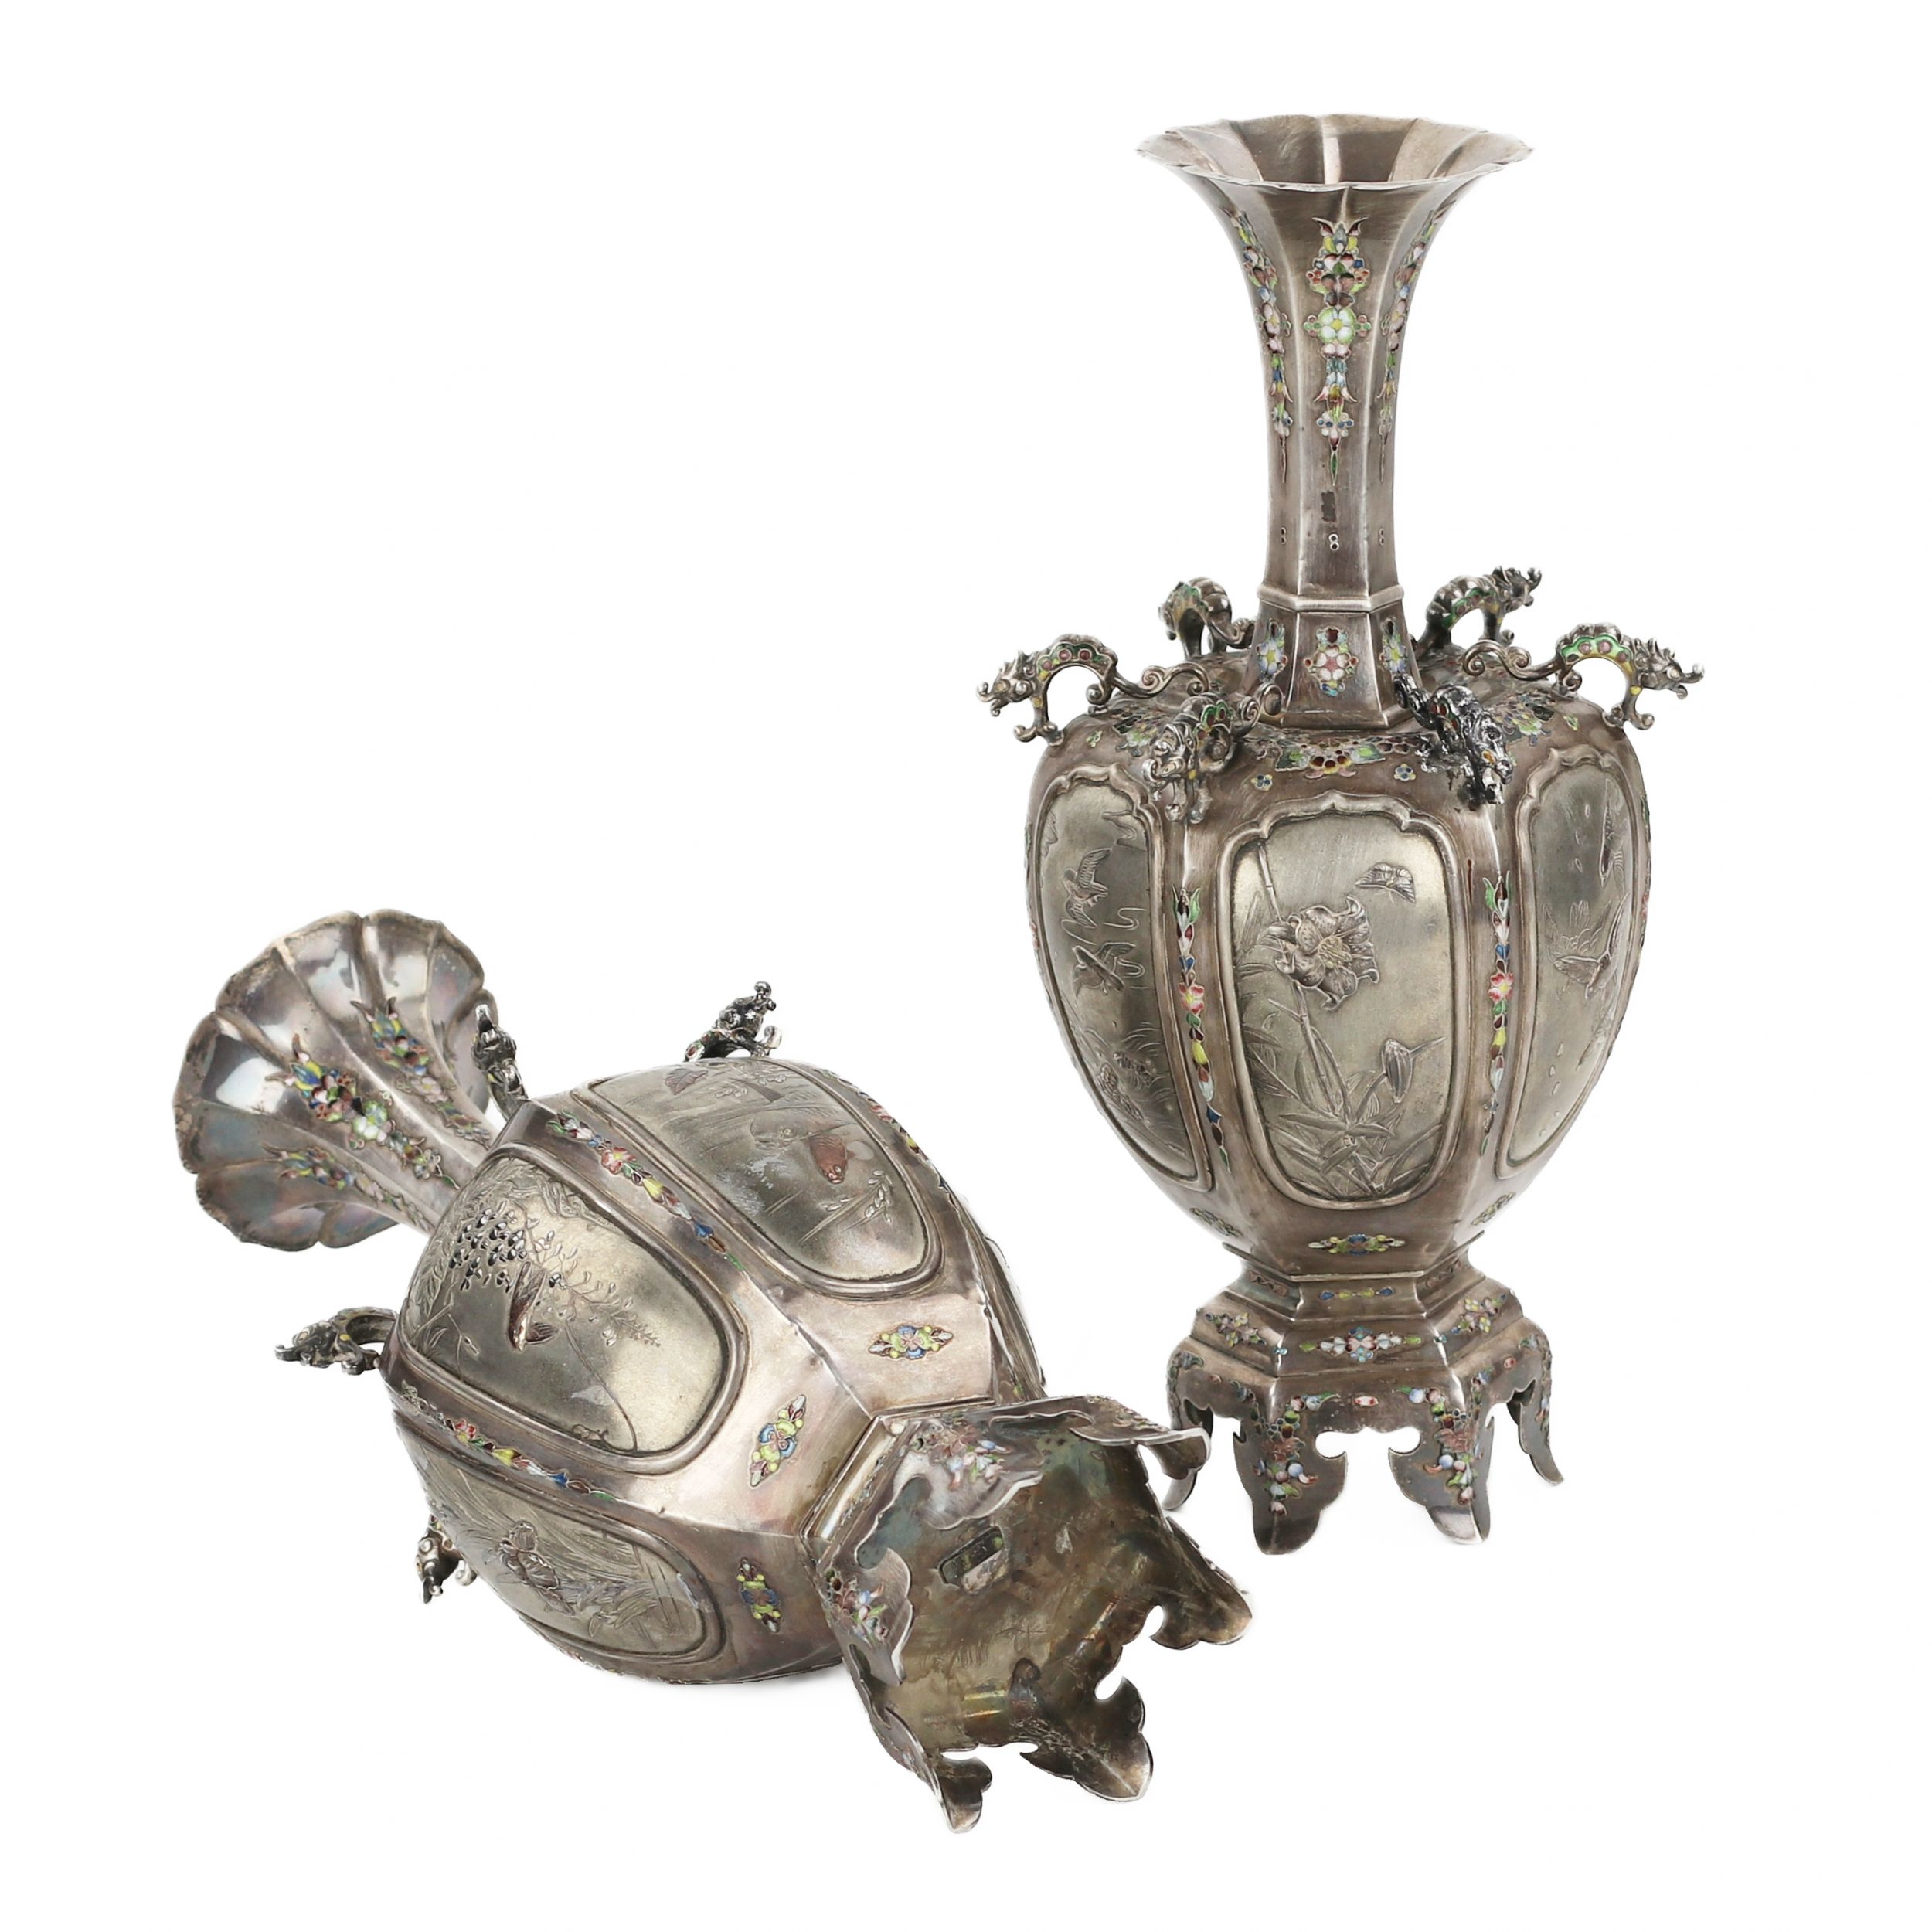 A pair of elegant Japanese vases made of silver and enamel. The turn of the 19th-20th centuries. - Image 5 of 6